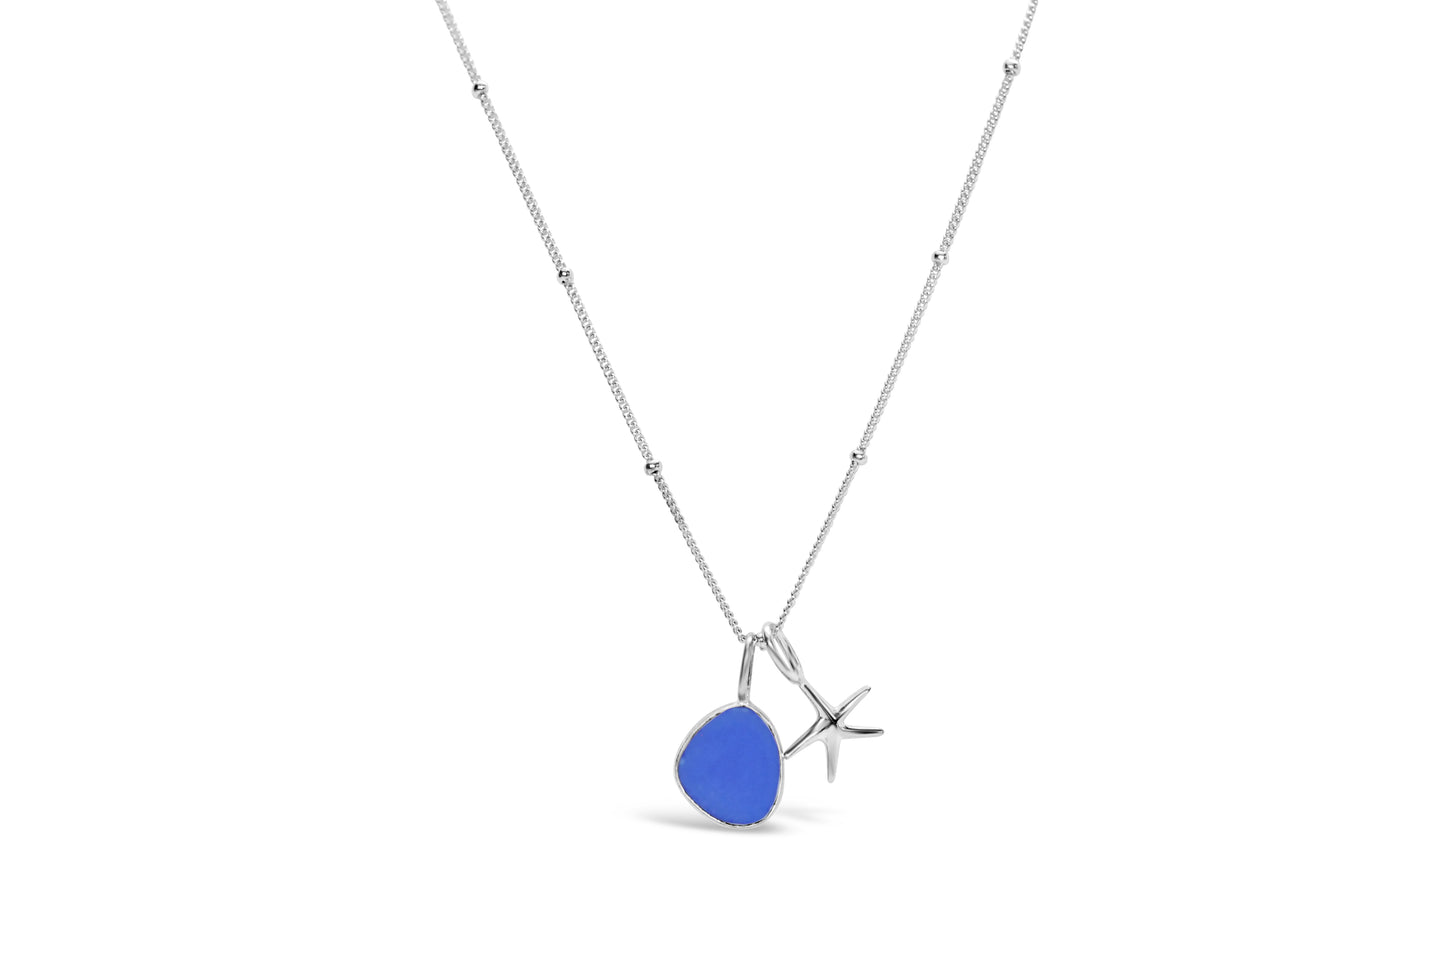 Seaglass Sentiments Necklace with Starfish